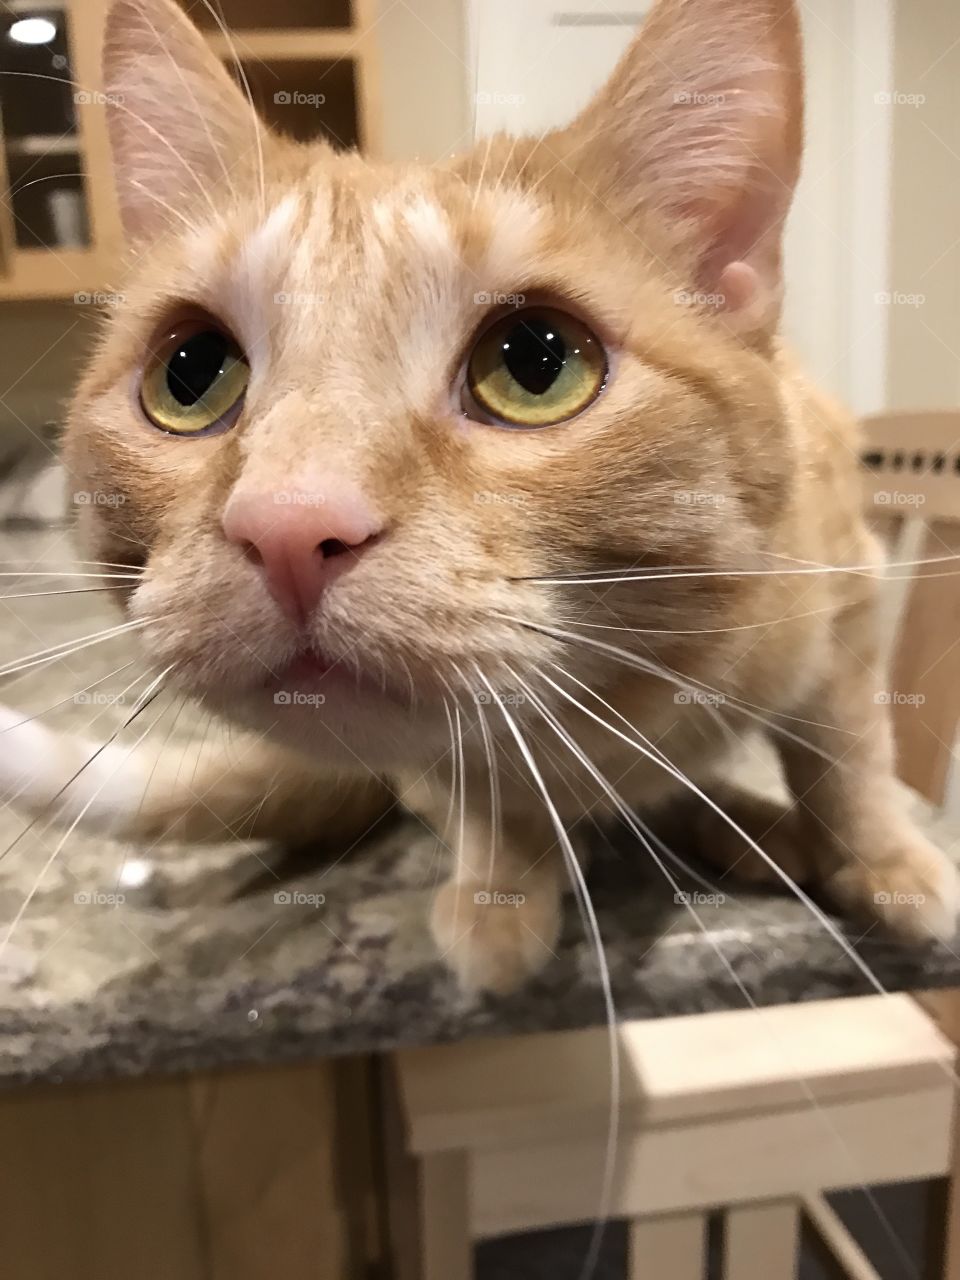 Darling orange tabby cat looking at something and ready to launch off of the countertop! 